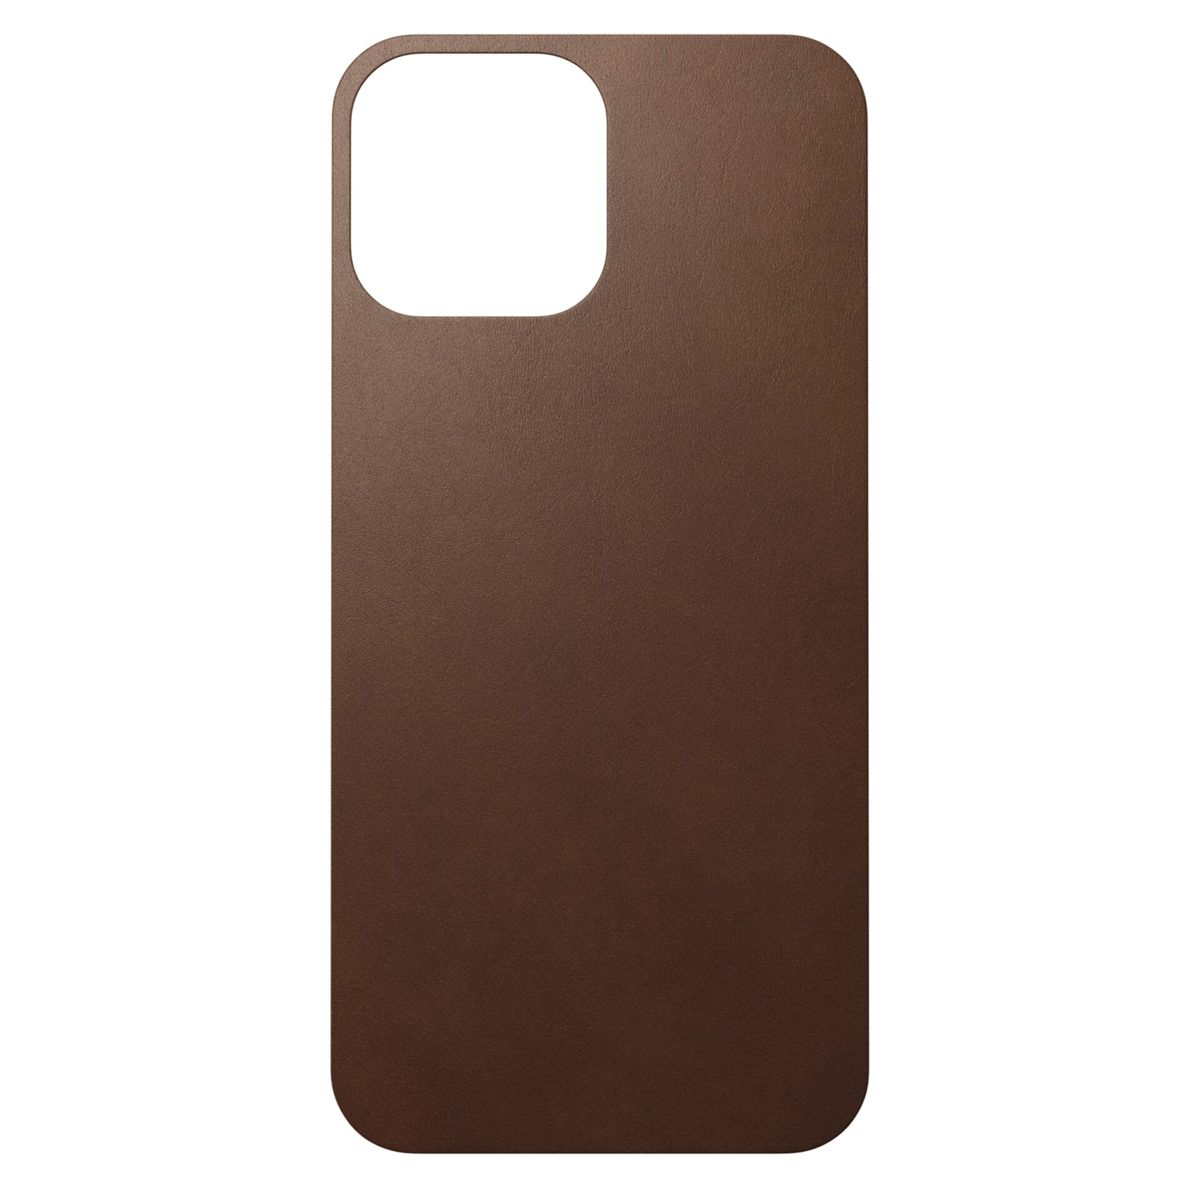 iPhone Rustic Skin braun 13 Max, Apple, Pro Apple, NOMAD Leather Backcover, Brown